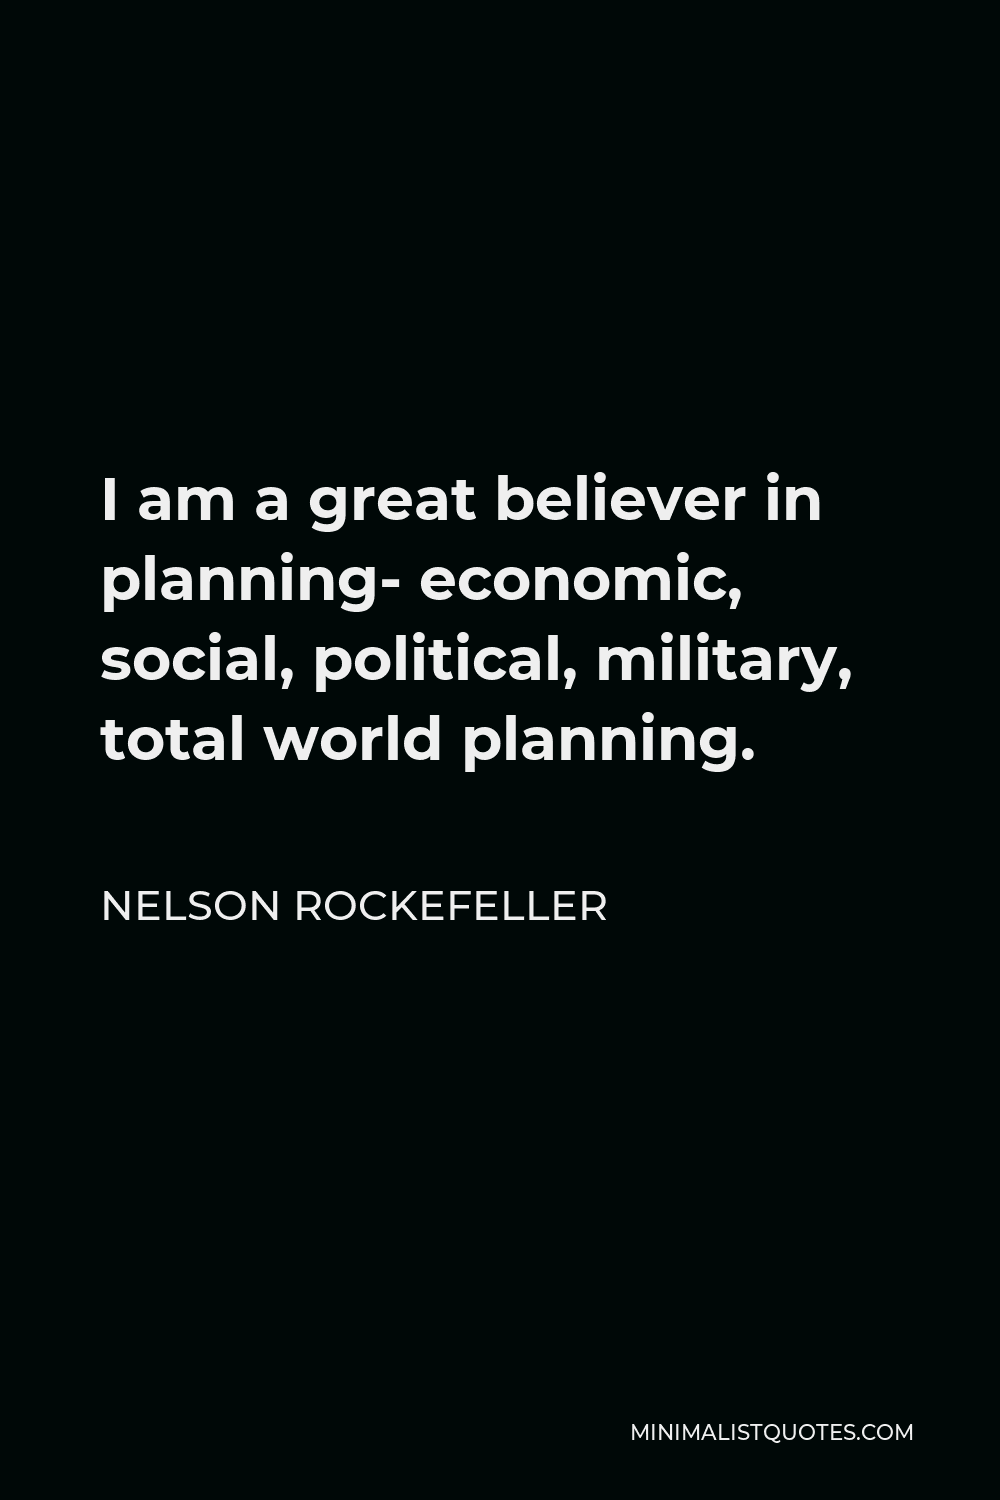 Nelson Rockefeller Quote - I am a great believer in planning- economic, social, political, military, total world planning.